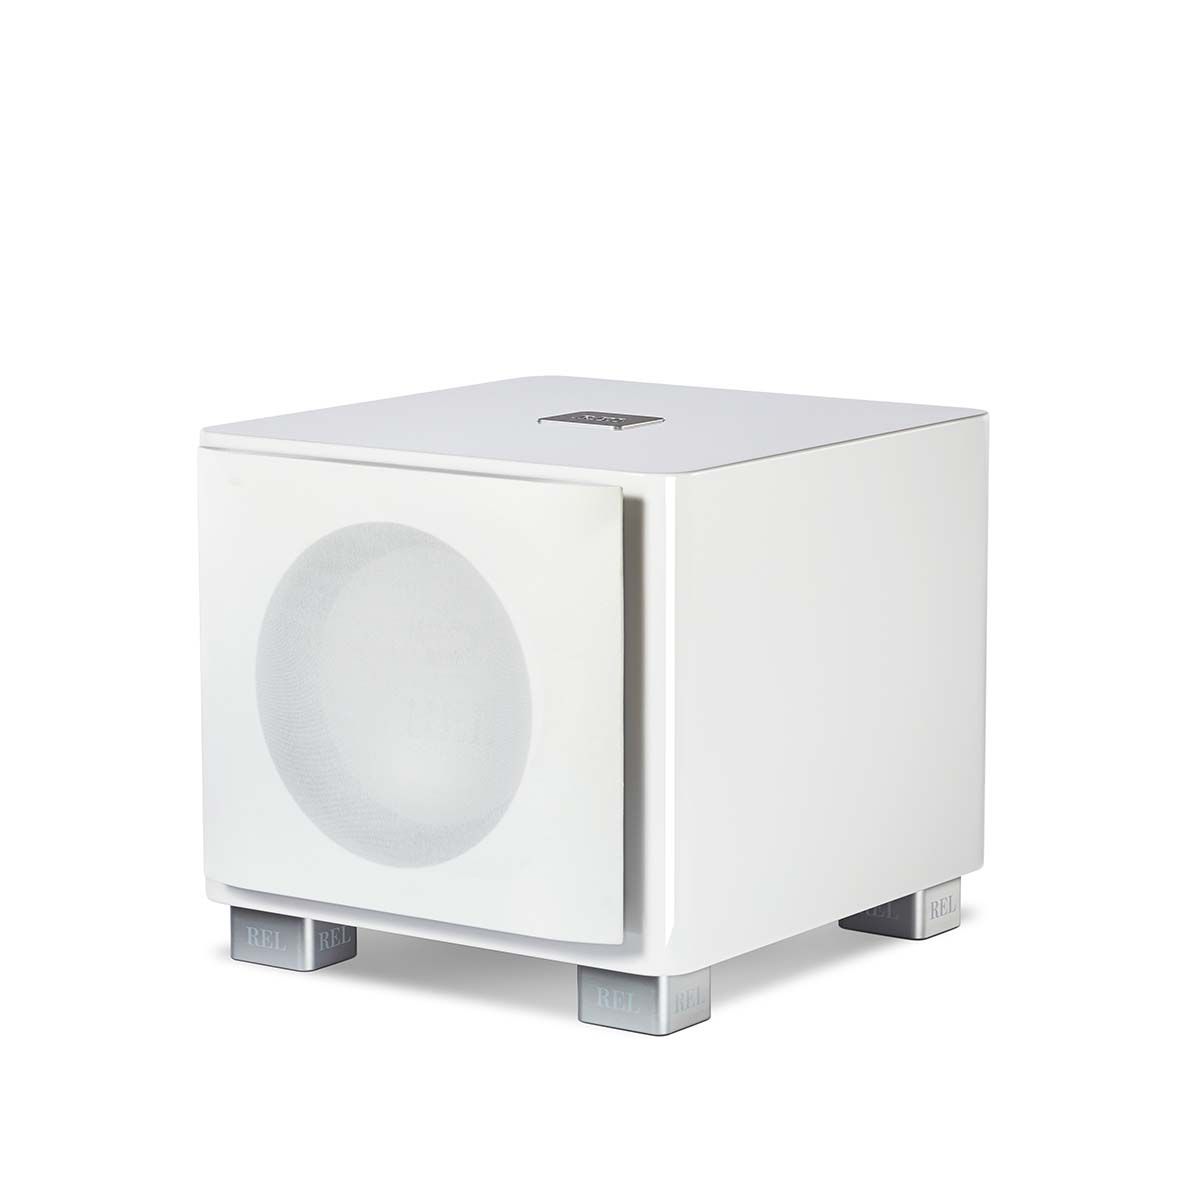 REL Acoustics T/9x Subwoofer, white, front angle with grille